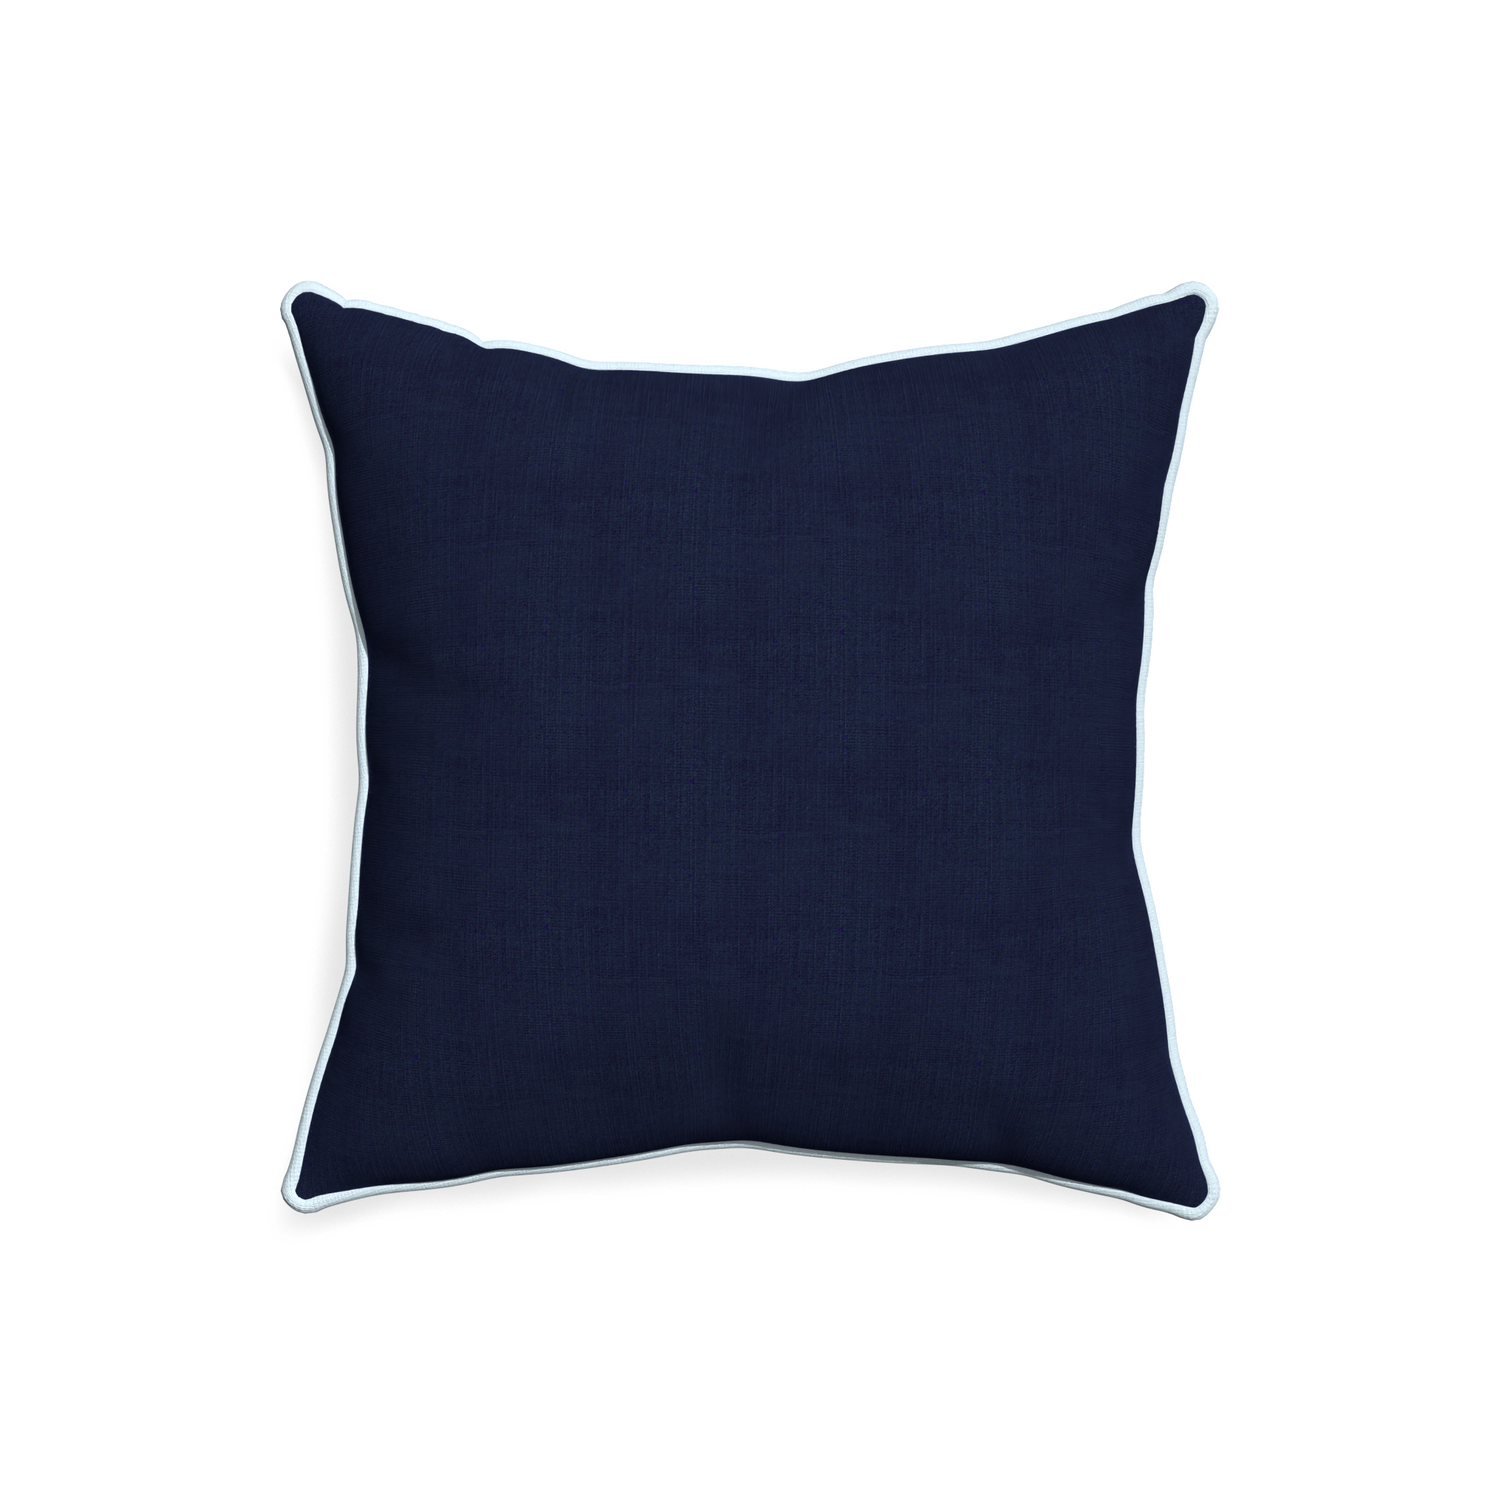 20-square midnight custom navy bluepillow with powder piping on white background